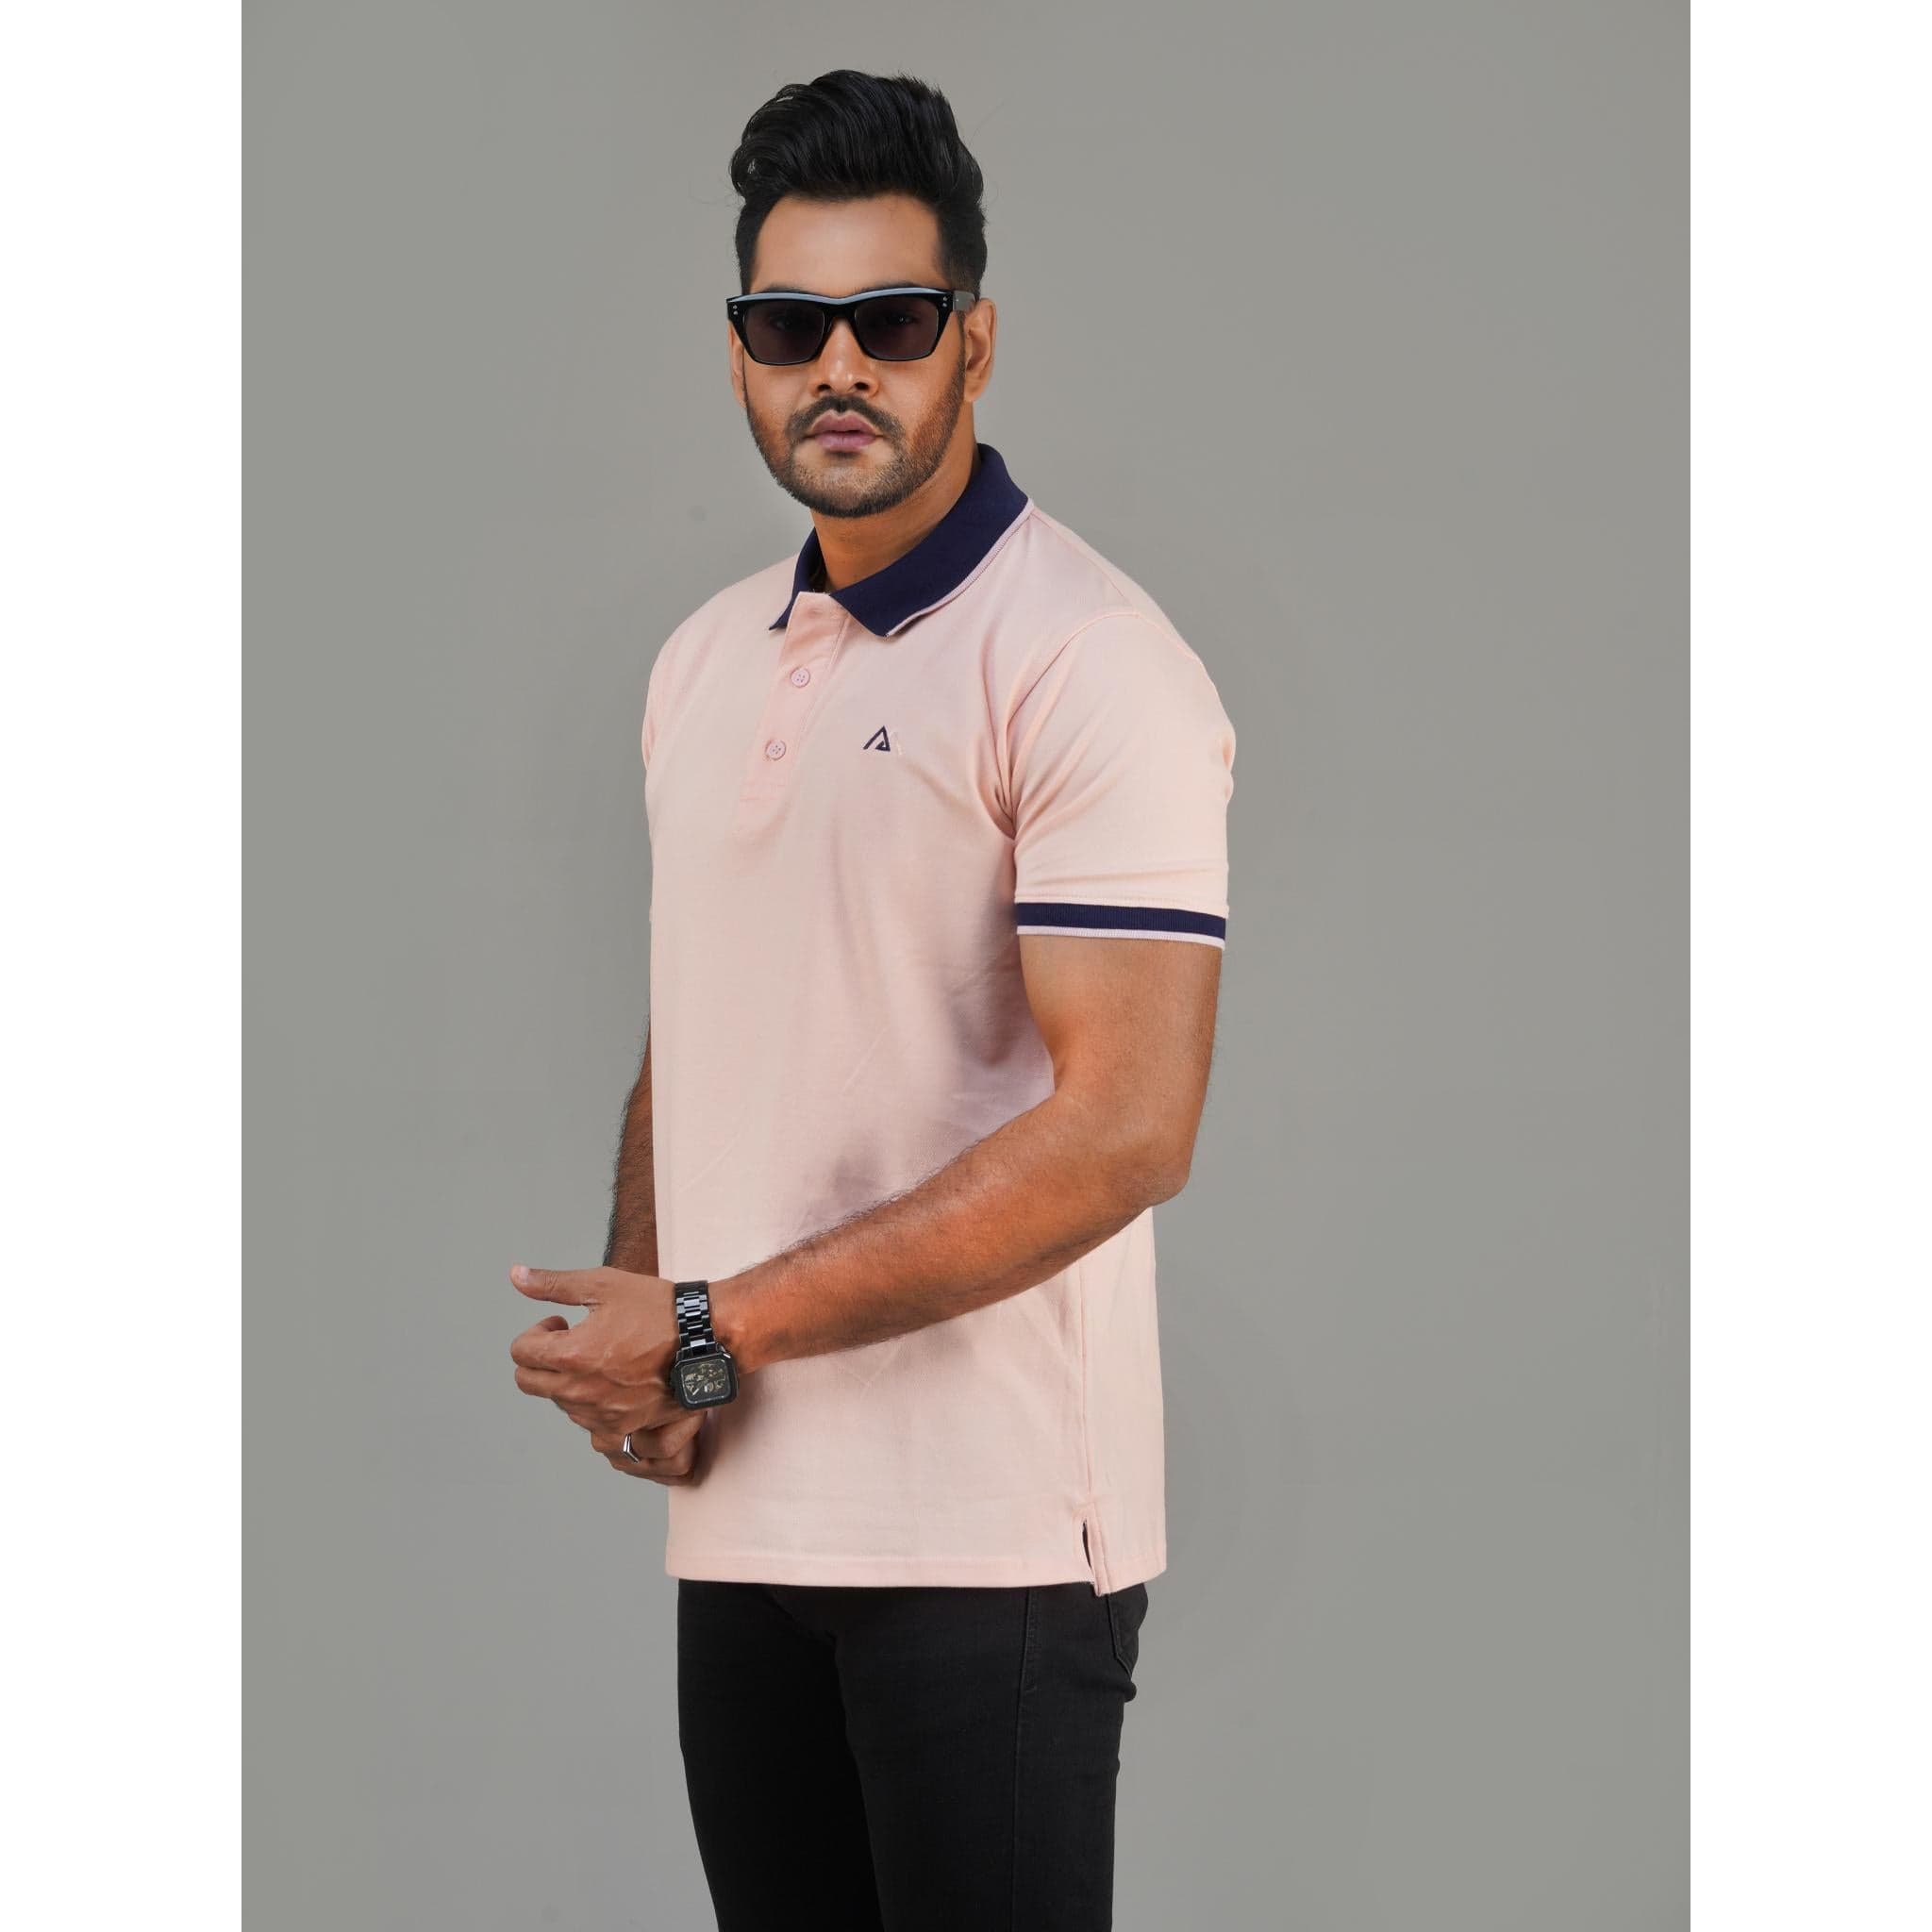 Polo Shirt for Men  Solid Light Pink Color